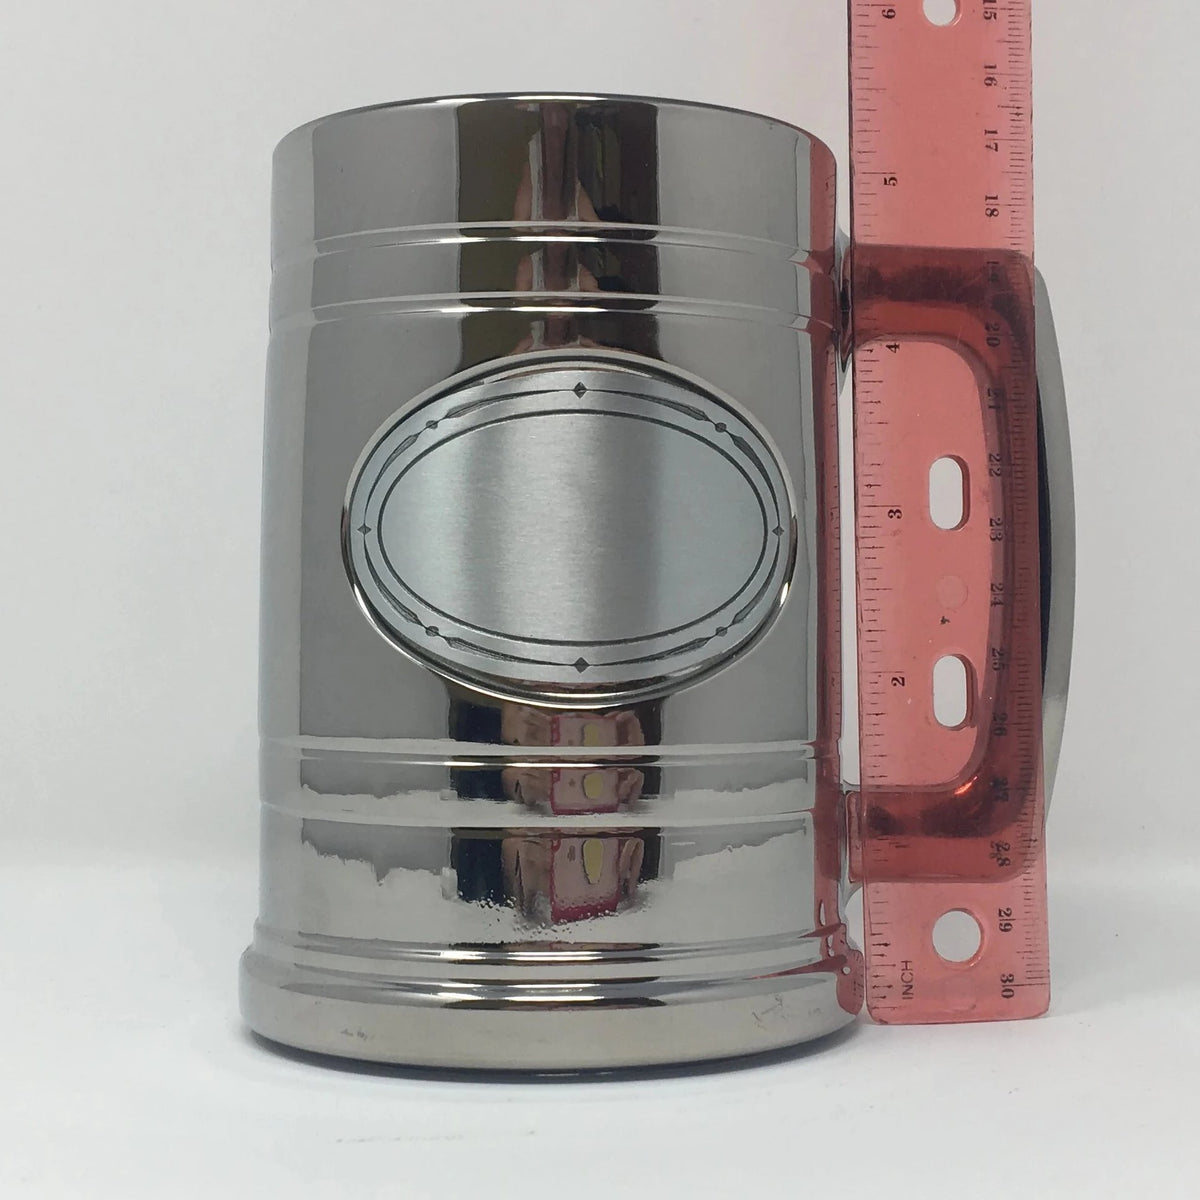 Beer Stein with Metallic Finish